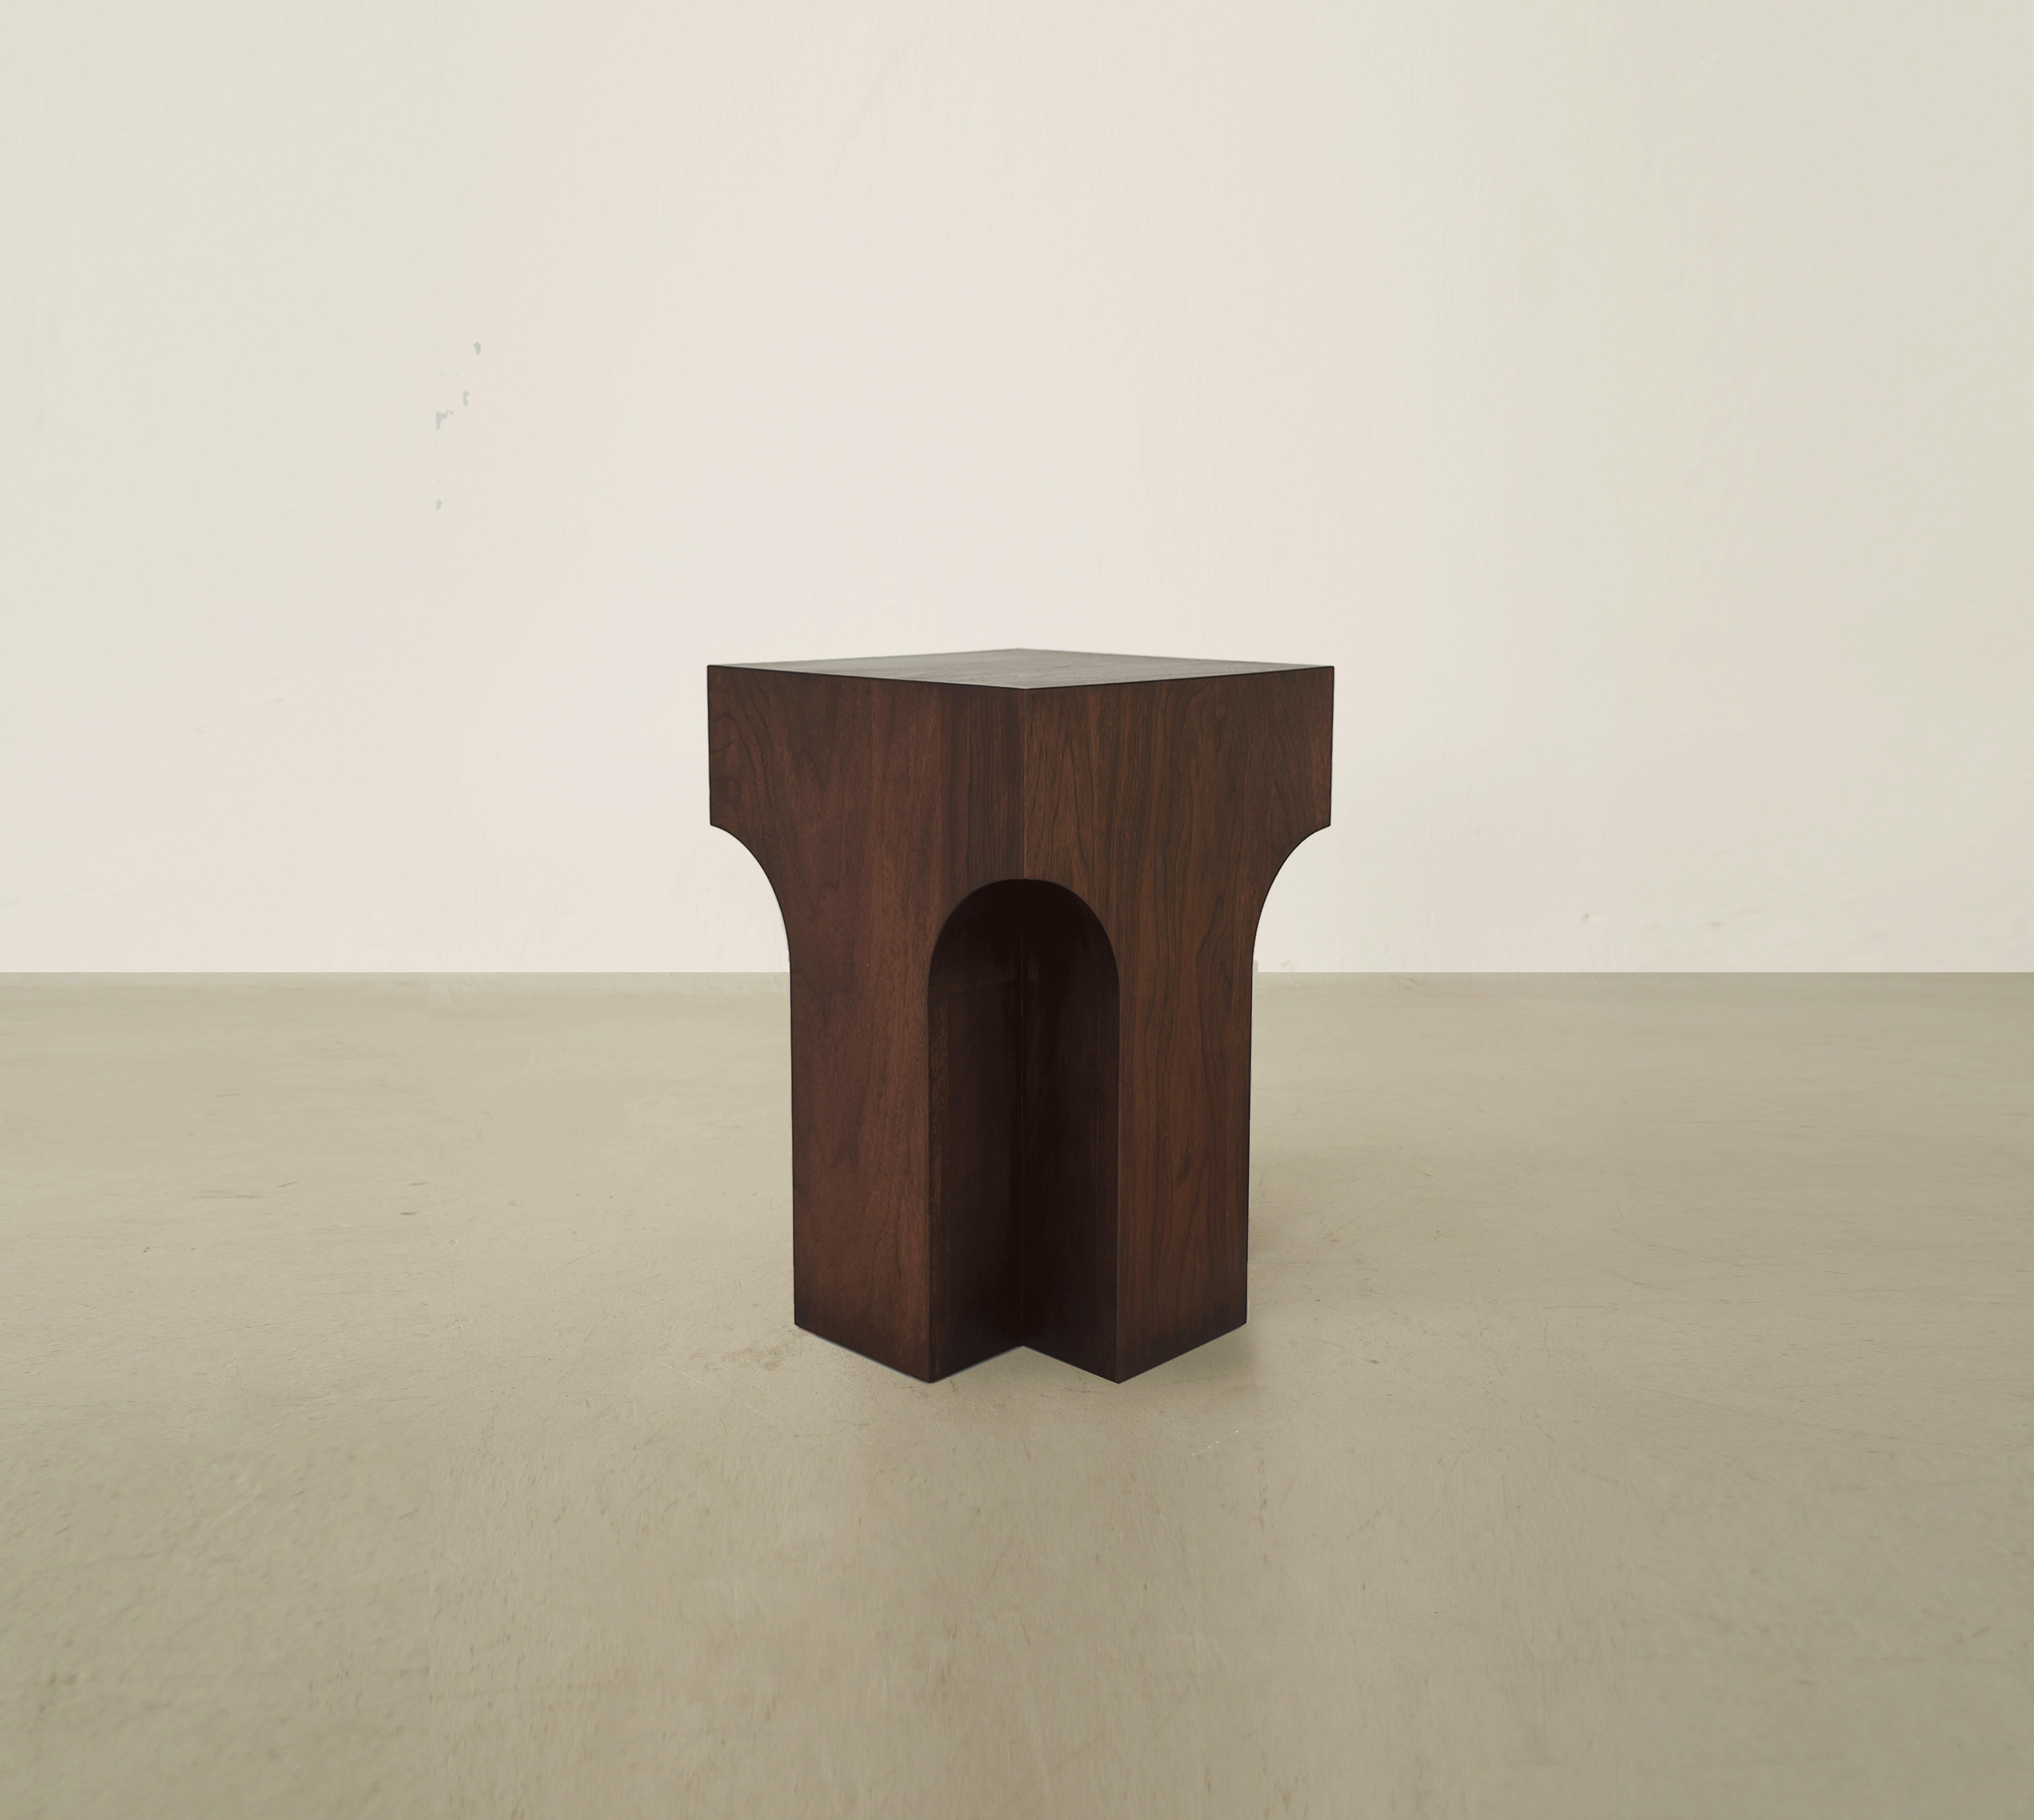 Amud Side Table by Selma Lazrak
Dimensions: D 32 x W 32 x H 46 cm 
Materials: Solid American walnut.

The piece is inspired by the architecture of the columns founded in the city of Fez in Morocco.
The chamfered edges of the pillars are inspired by